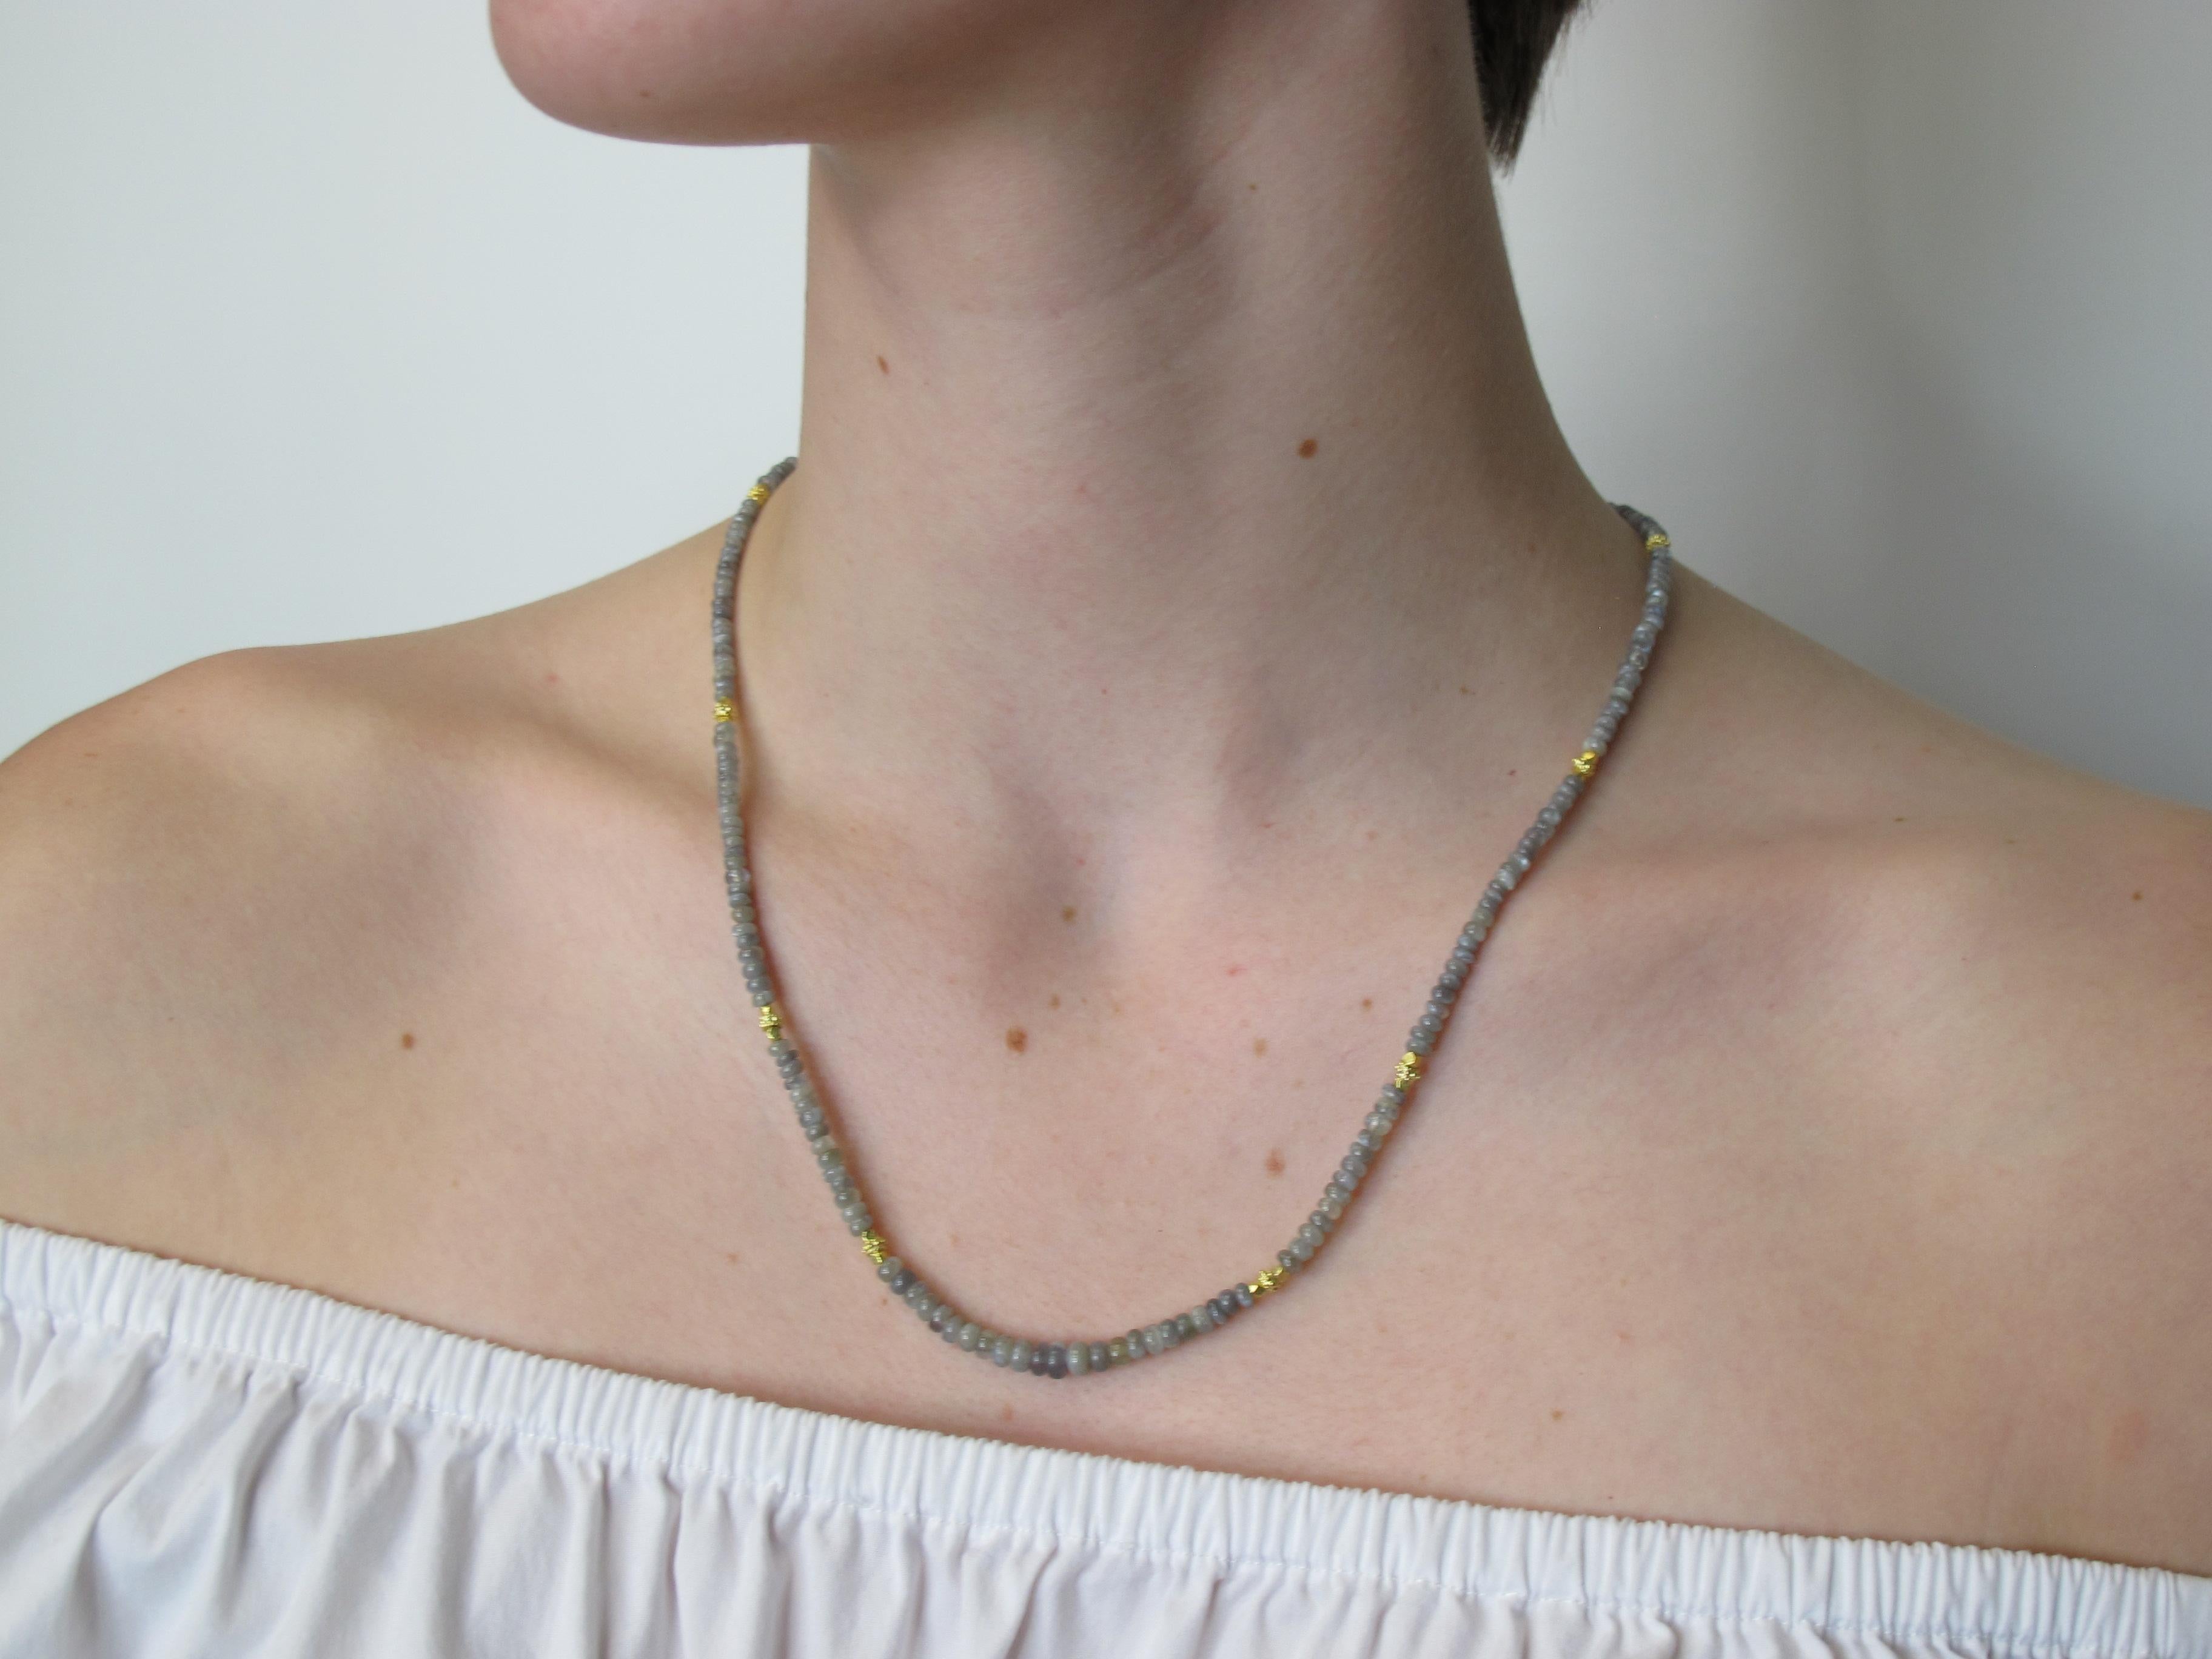 Artisan Alexandrite Chrysoberyl Rondelle Bead Necklace, Yellow Gold Accents, 18 Inches